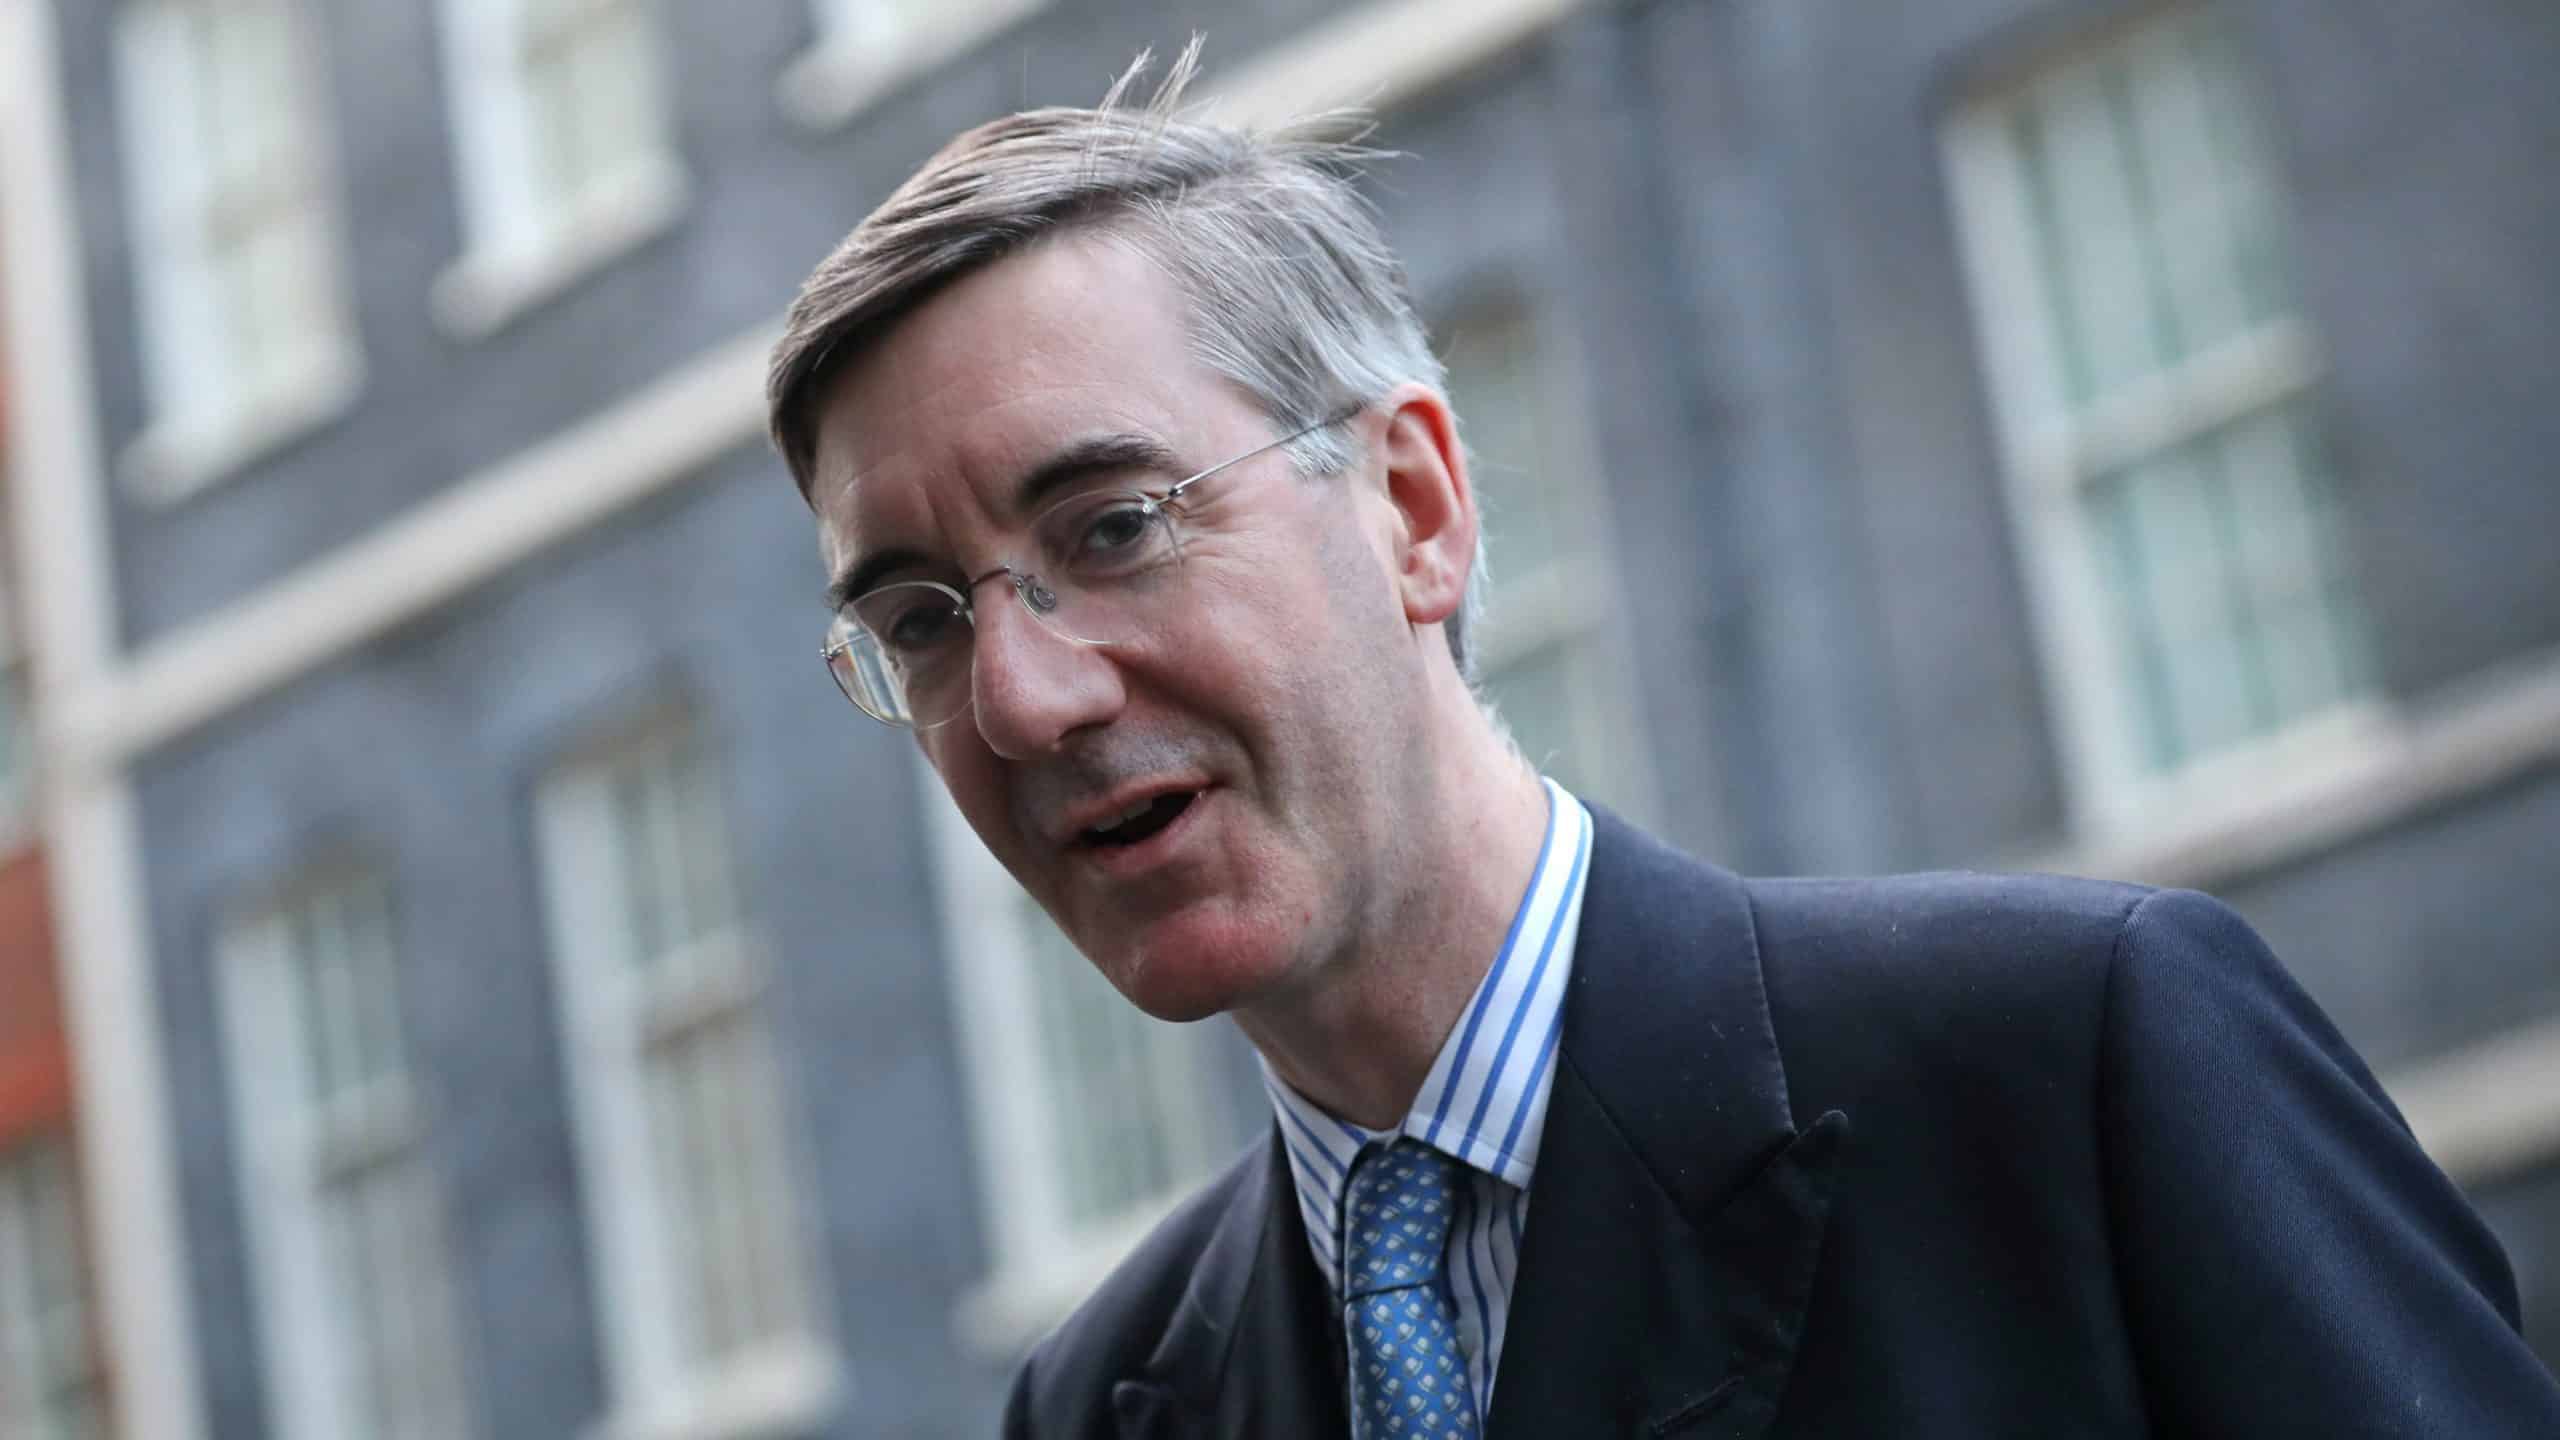 Rees-Mogg suggests pub-goers enjoy ‘a yard of ale’ to mark lockdown easing